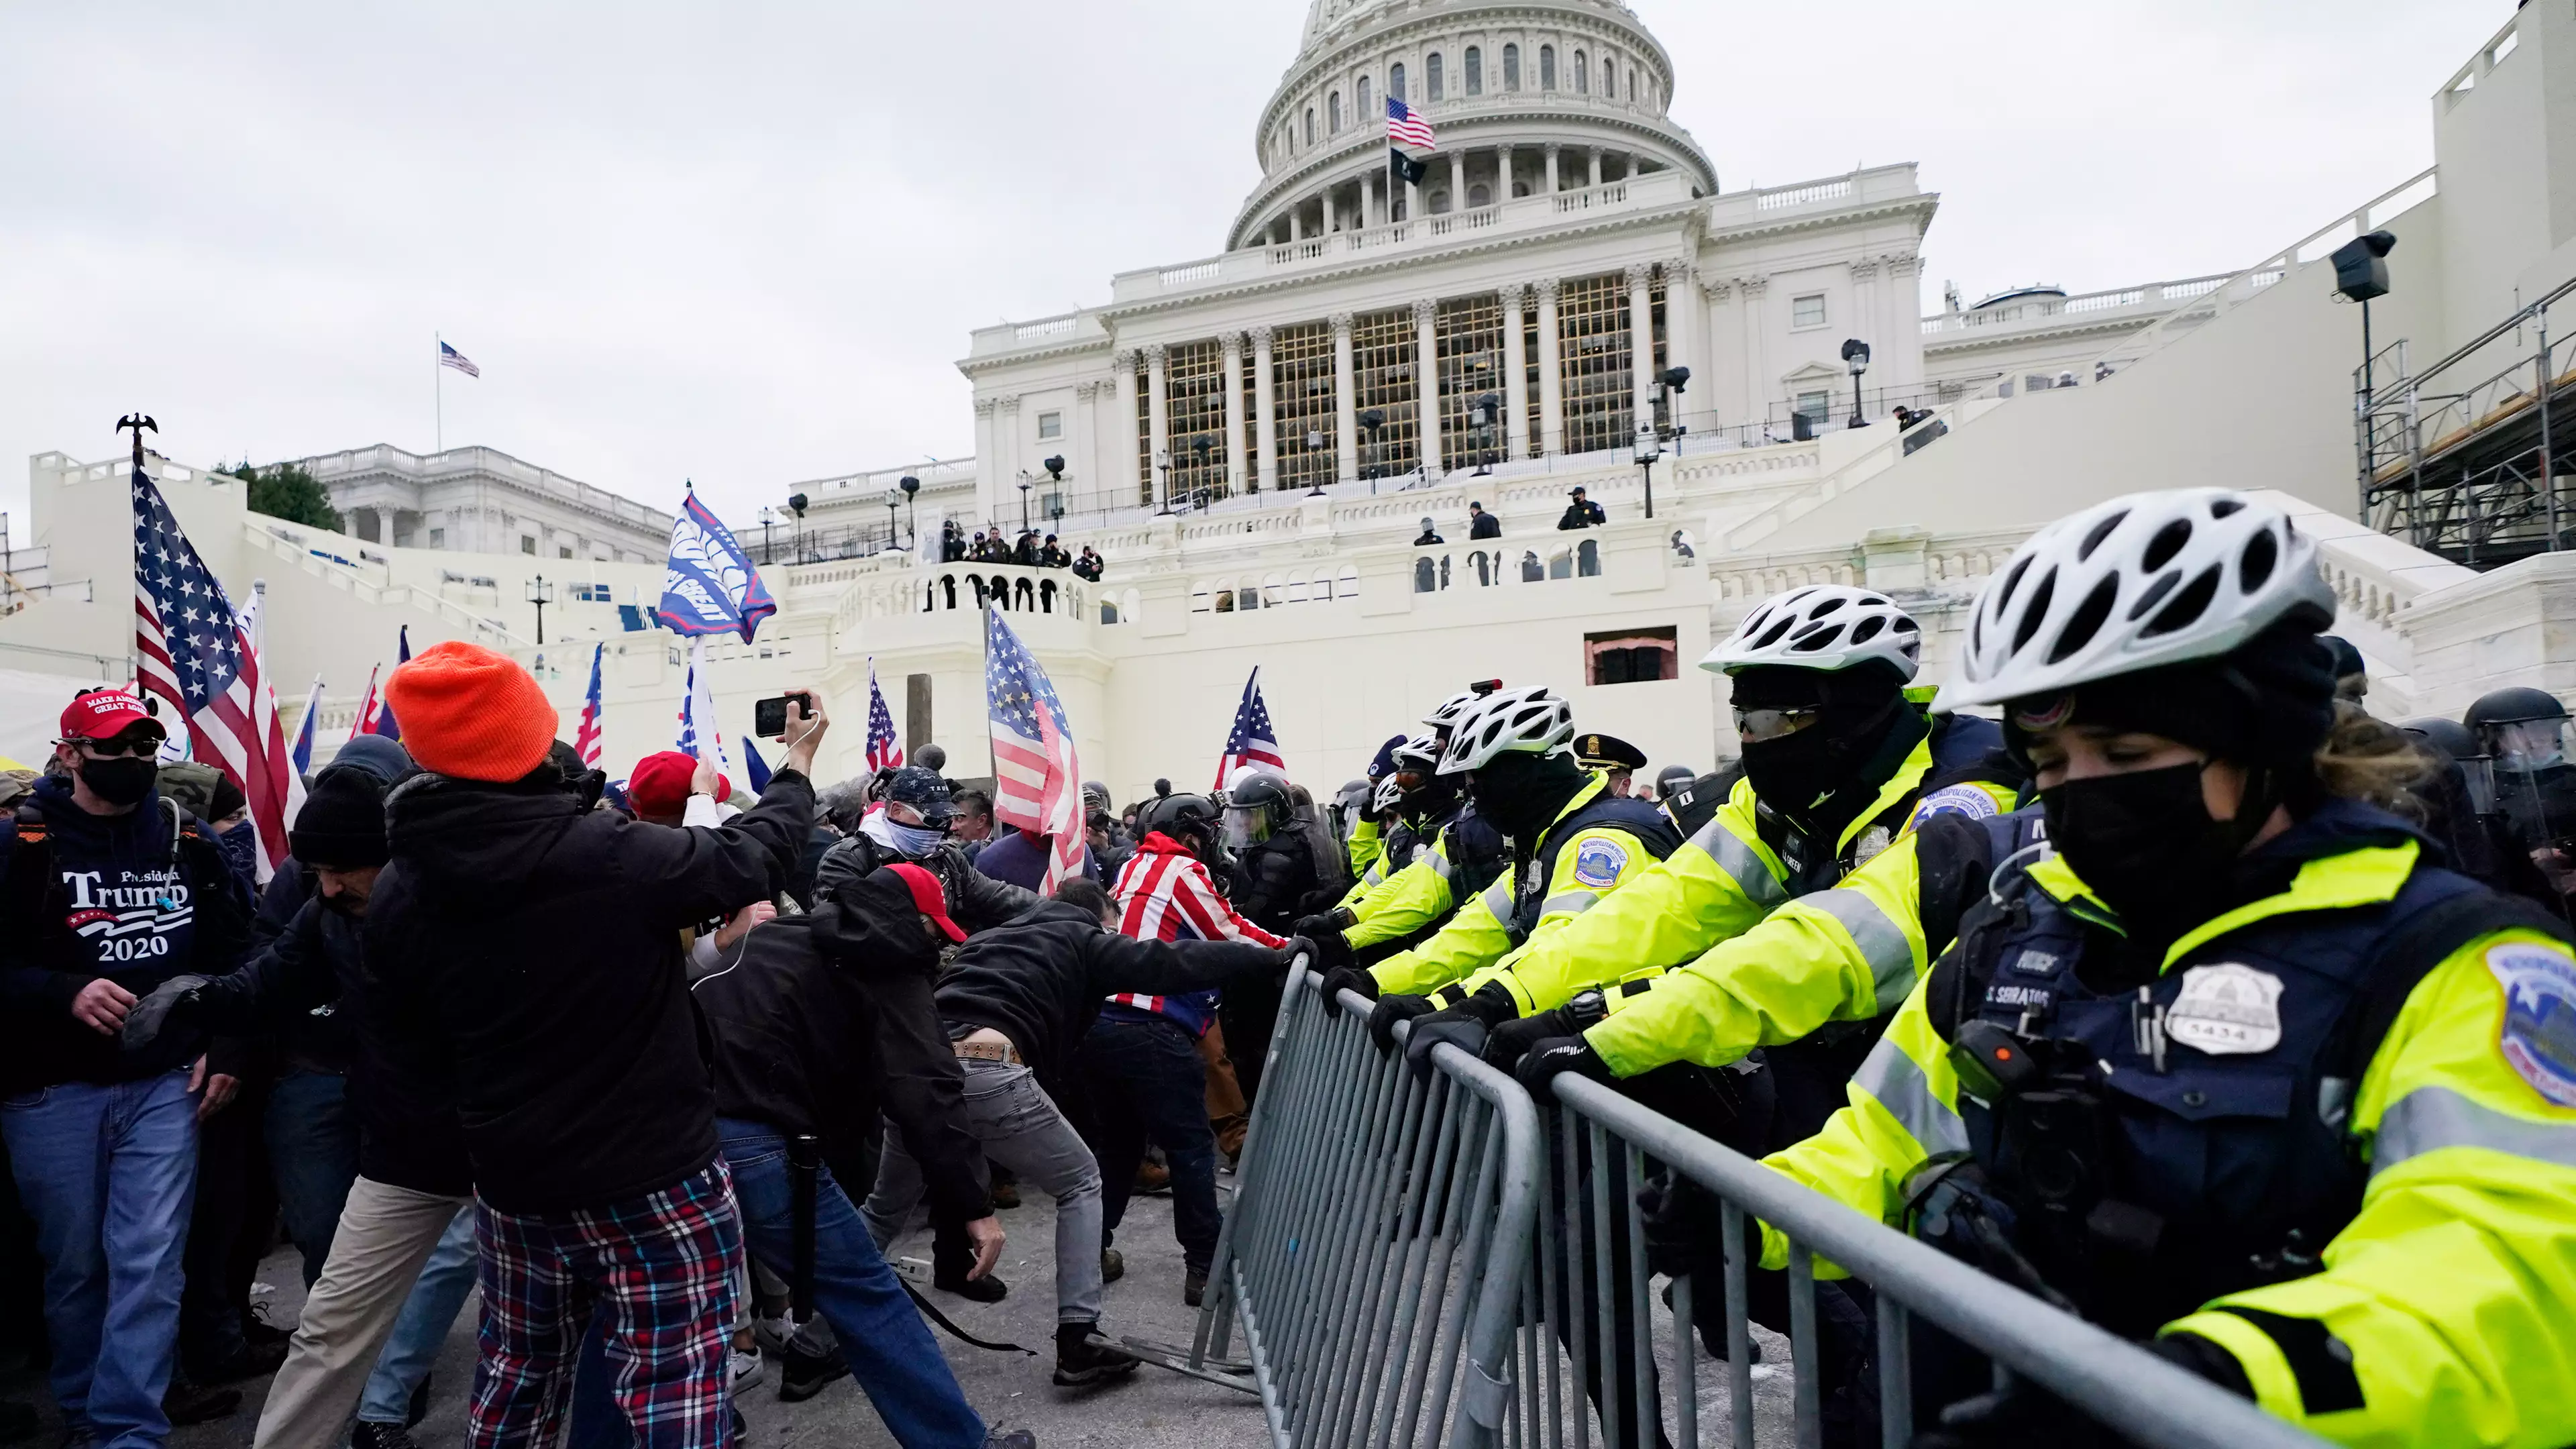 Trump Supporters Violently Storm The Capitol Building Ahead Of Electoral College Count